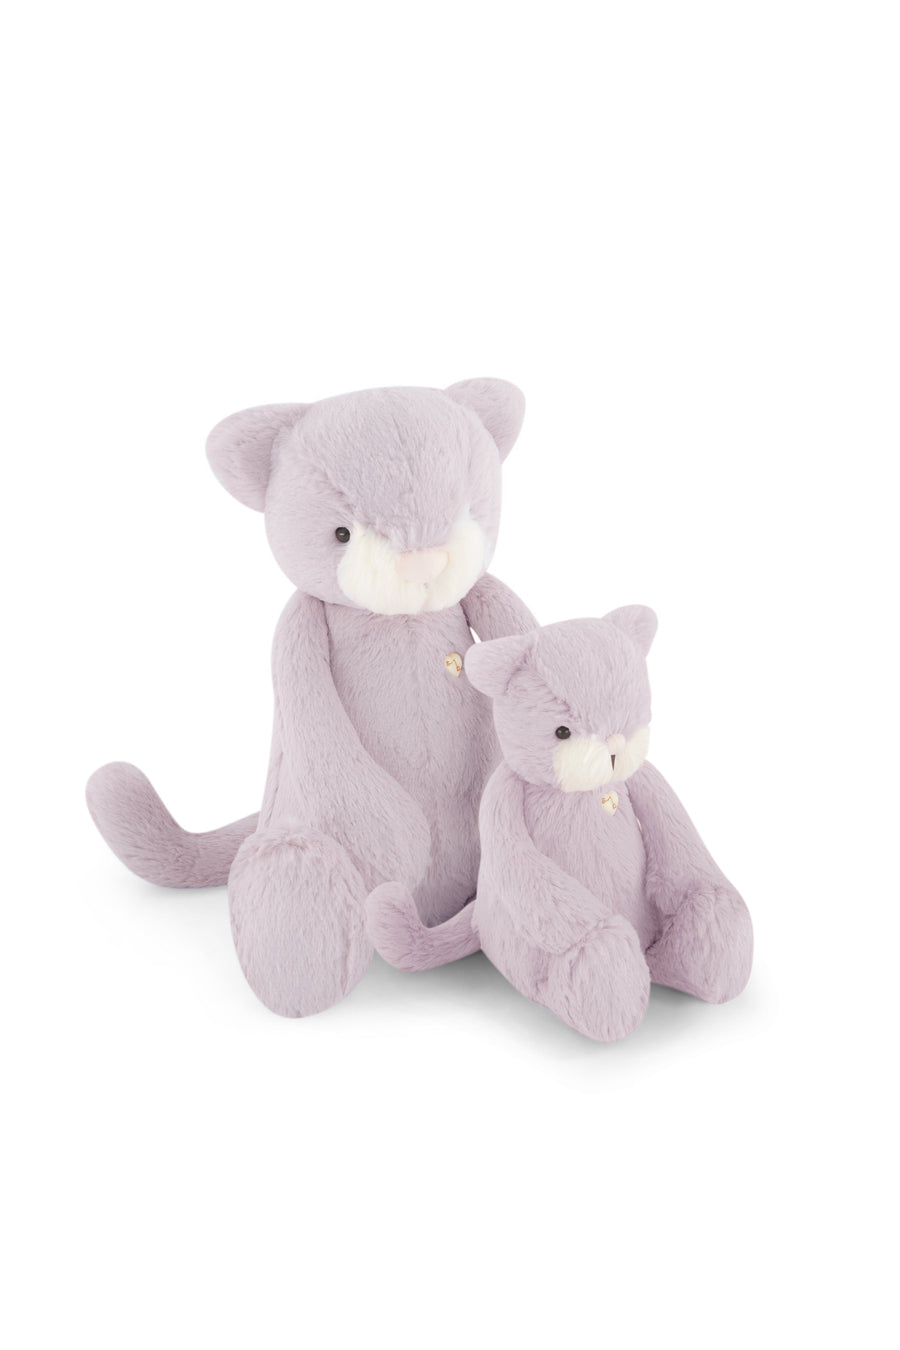 Snuggle Bunnies - Elsie the Kitty - Violet Childrens Toy from Jamie Kay USA